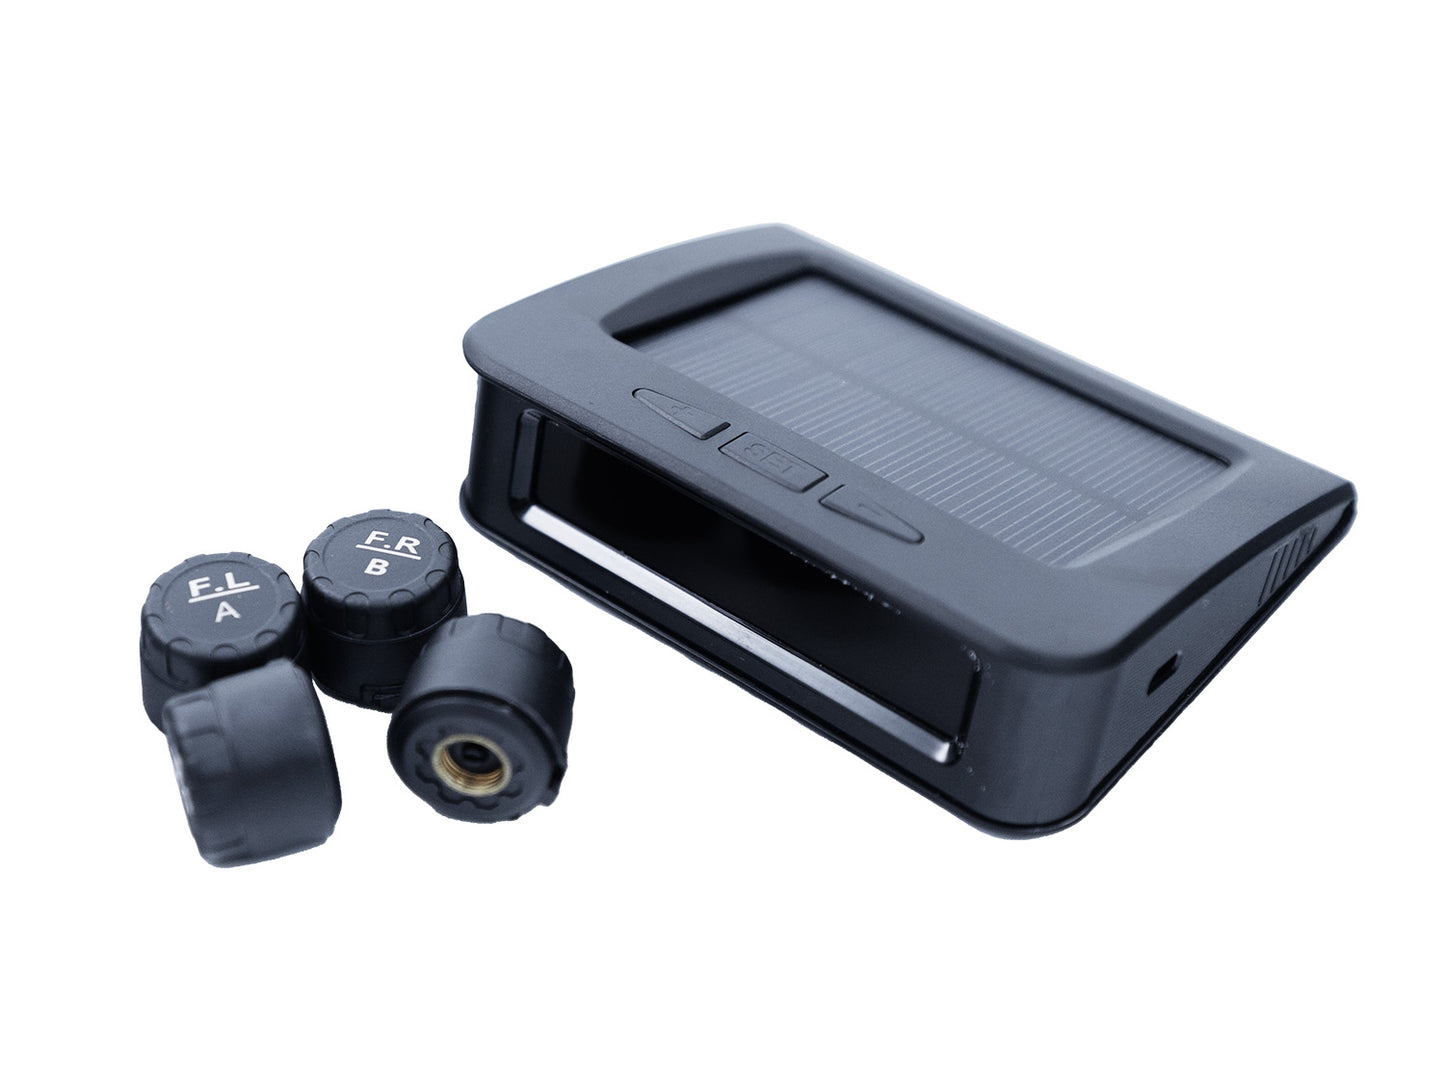 4WD Central - External Tyre Pressure Monitoring System (TPMS) -